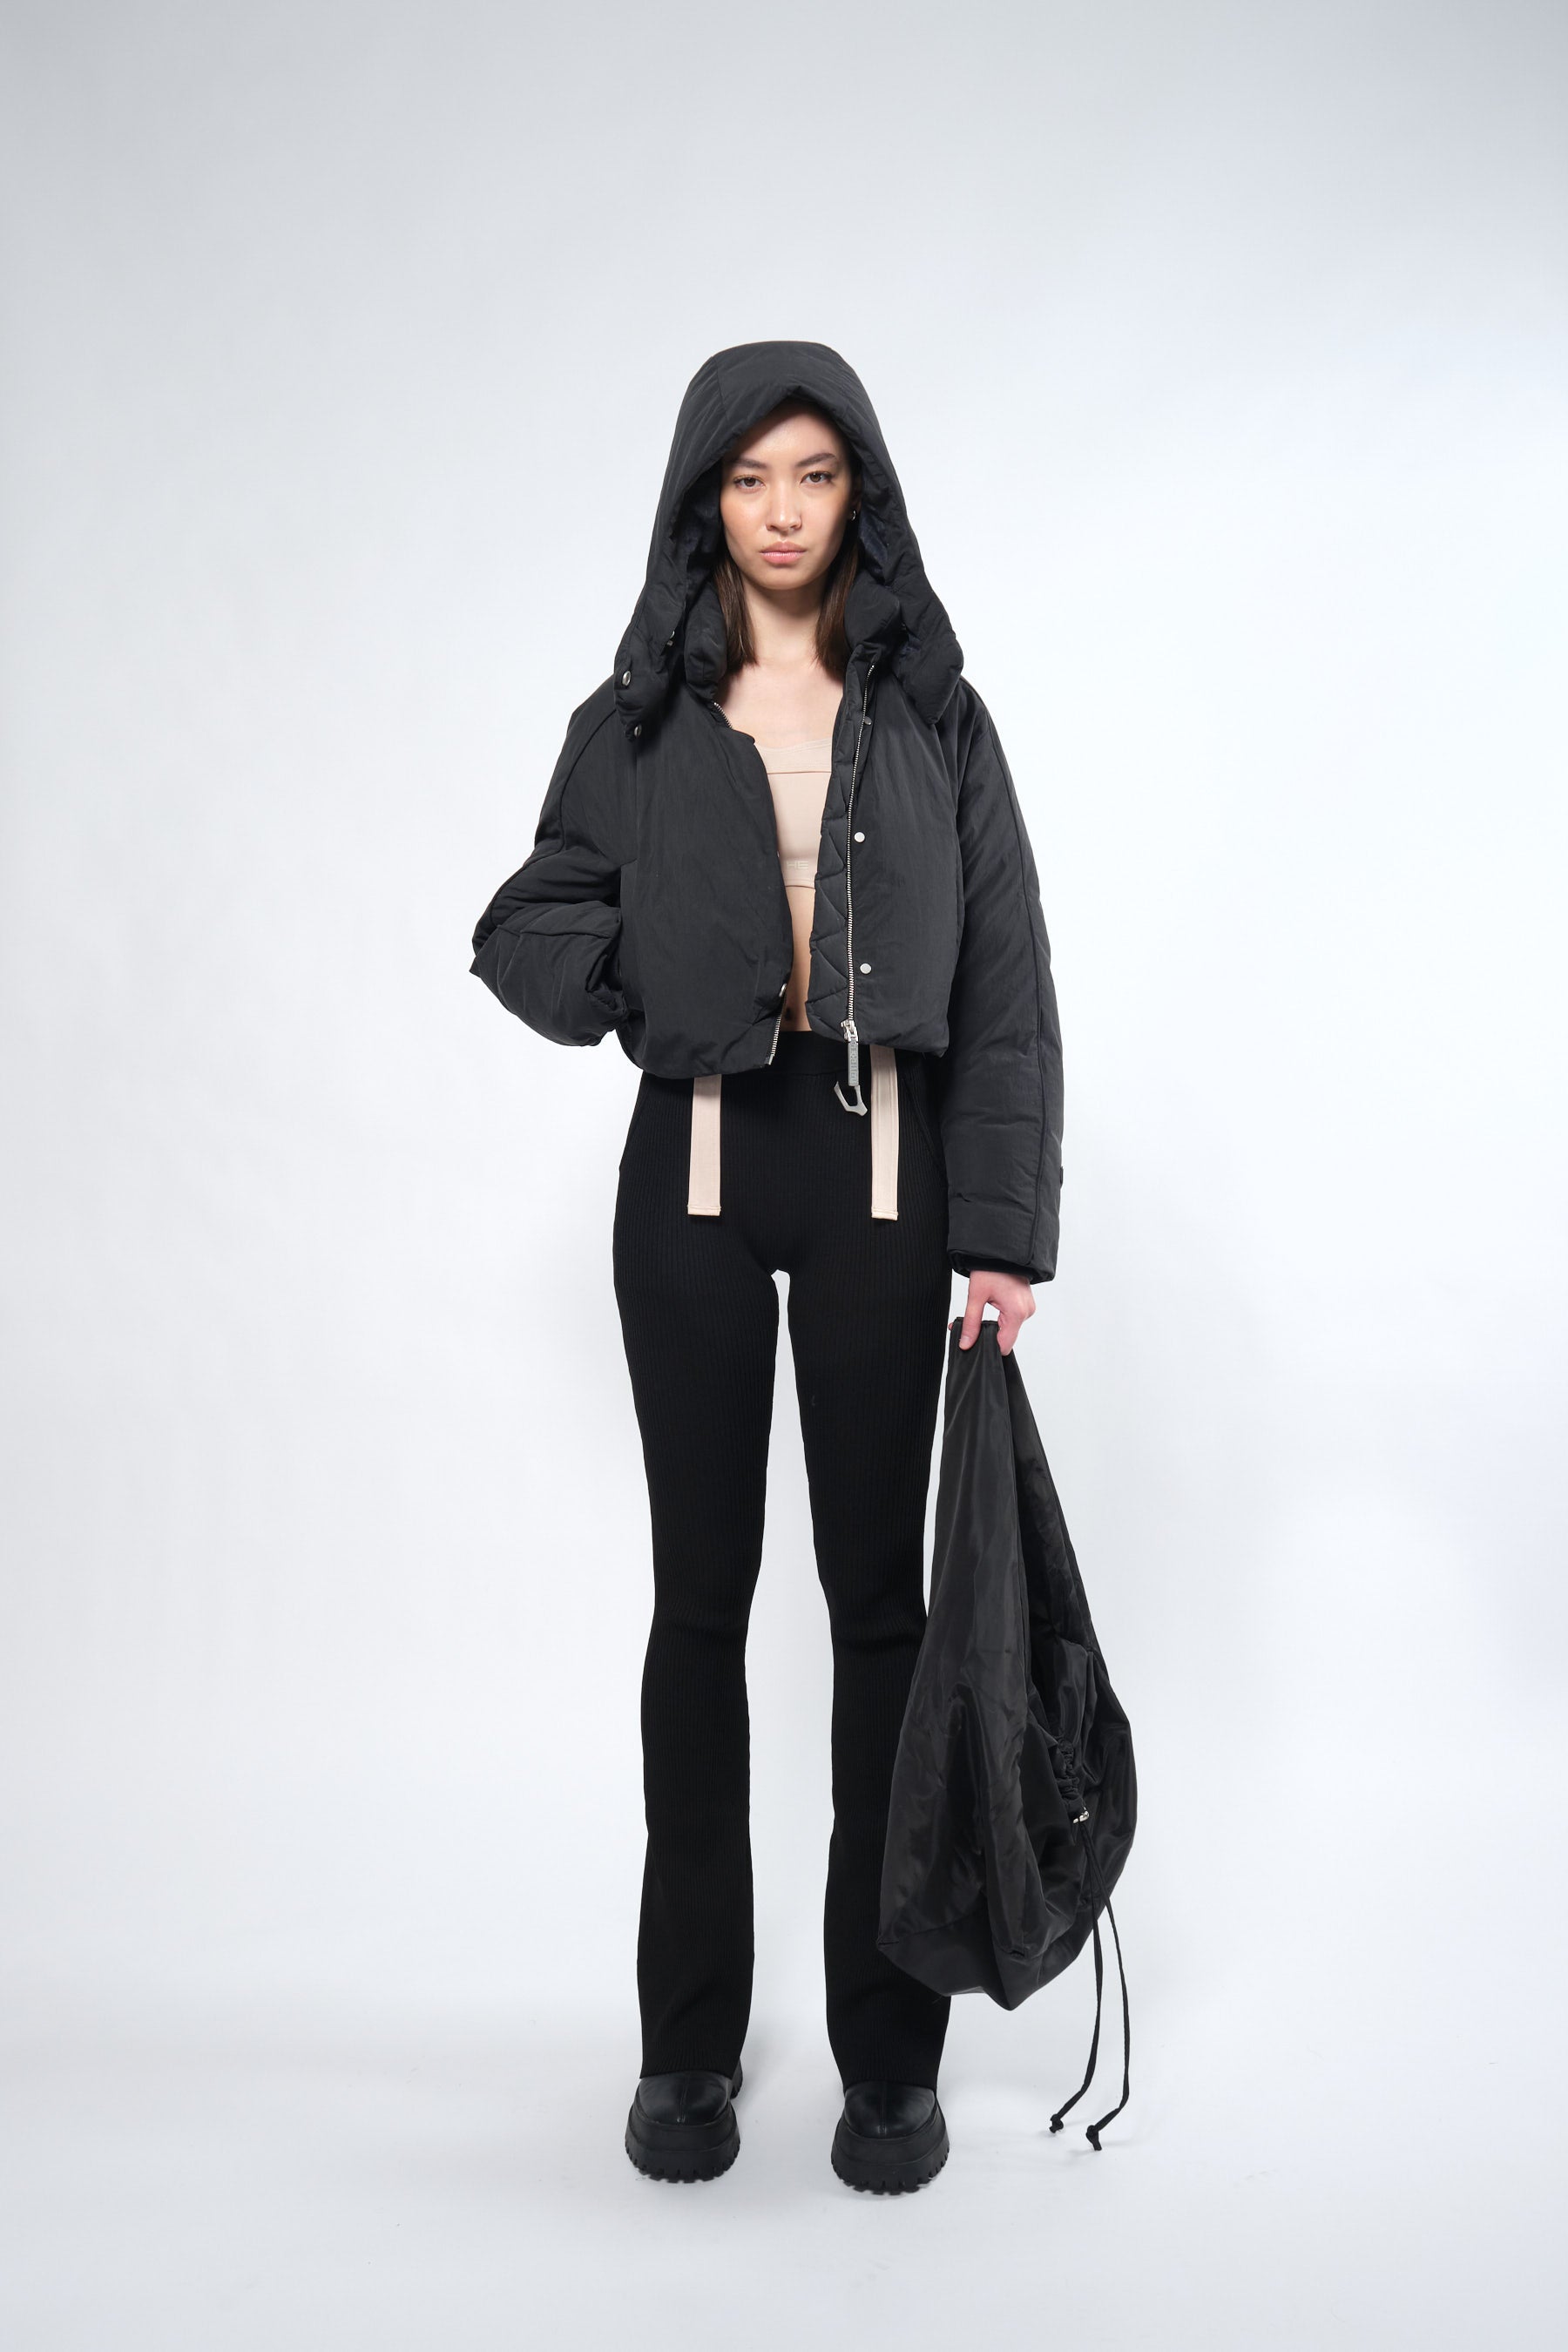  Re:Down® Crop Black Puffer Jacket with Hood - Adhere To  - 1